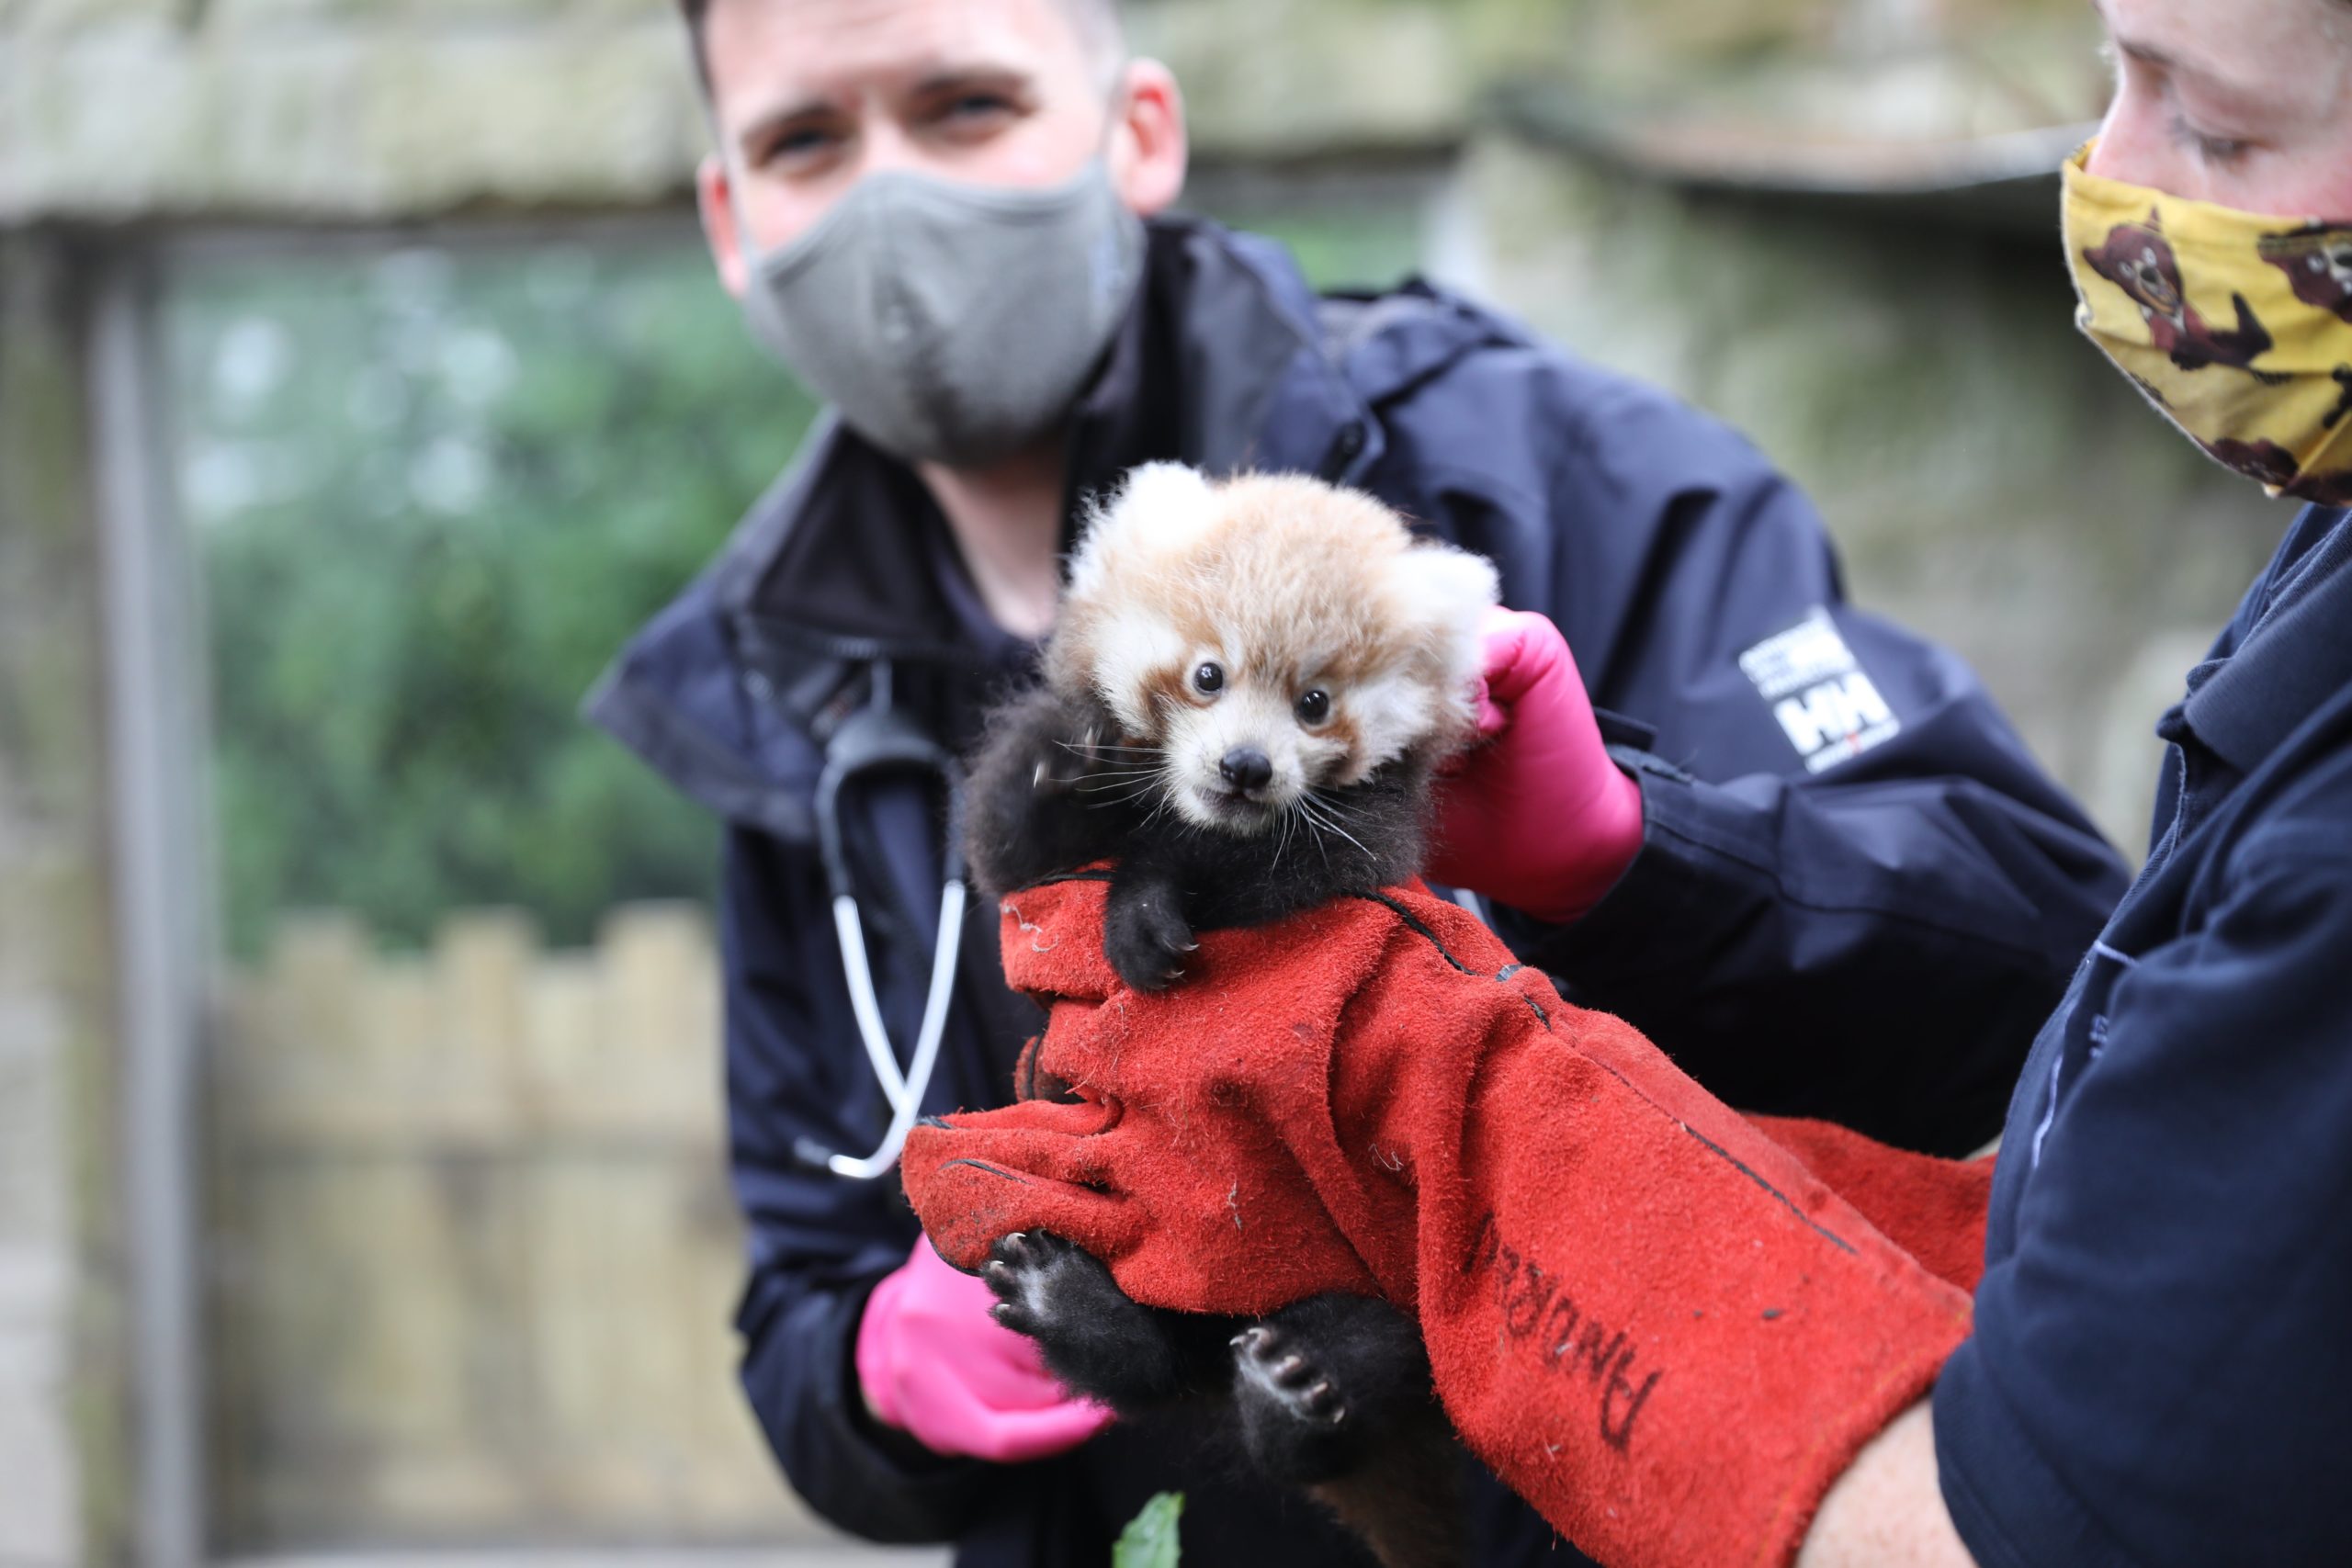 Baby red panda named by zookeepers